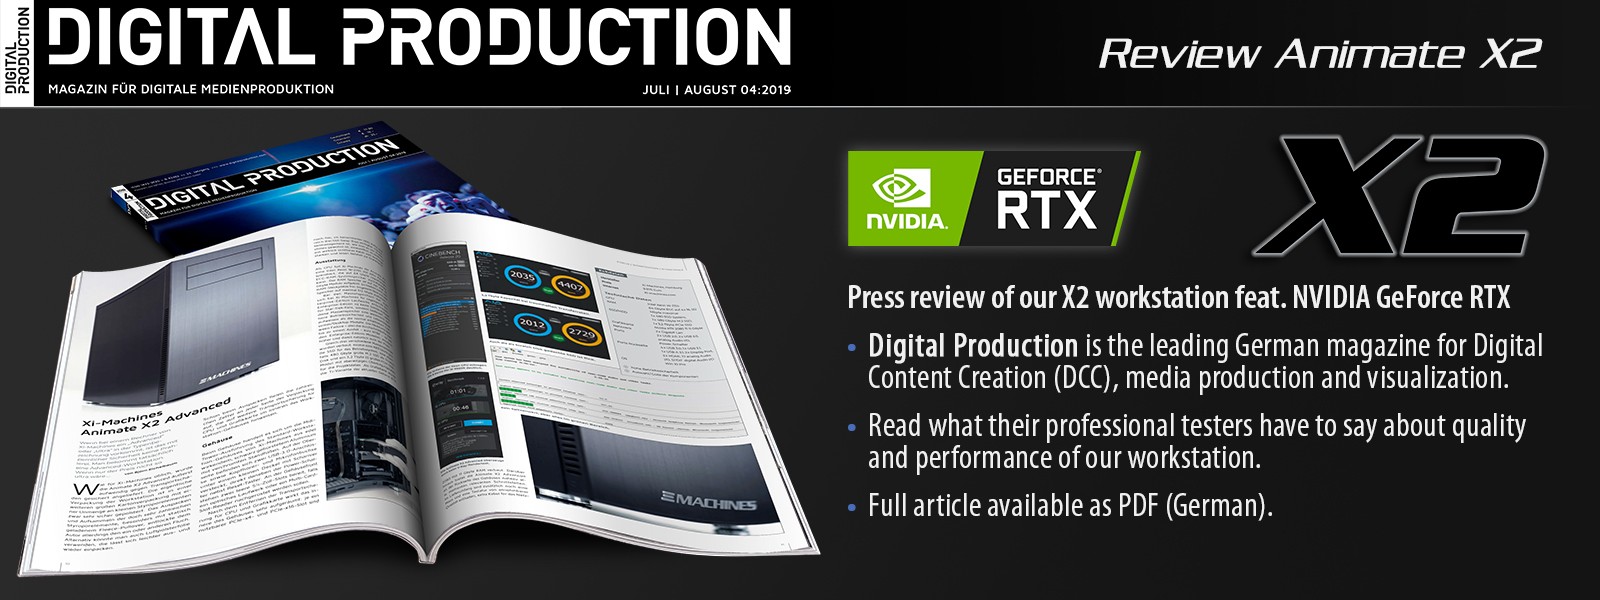 X2 - now featuring NVIDIA GeForce RTX